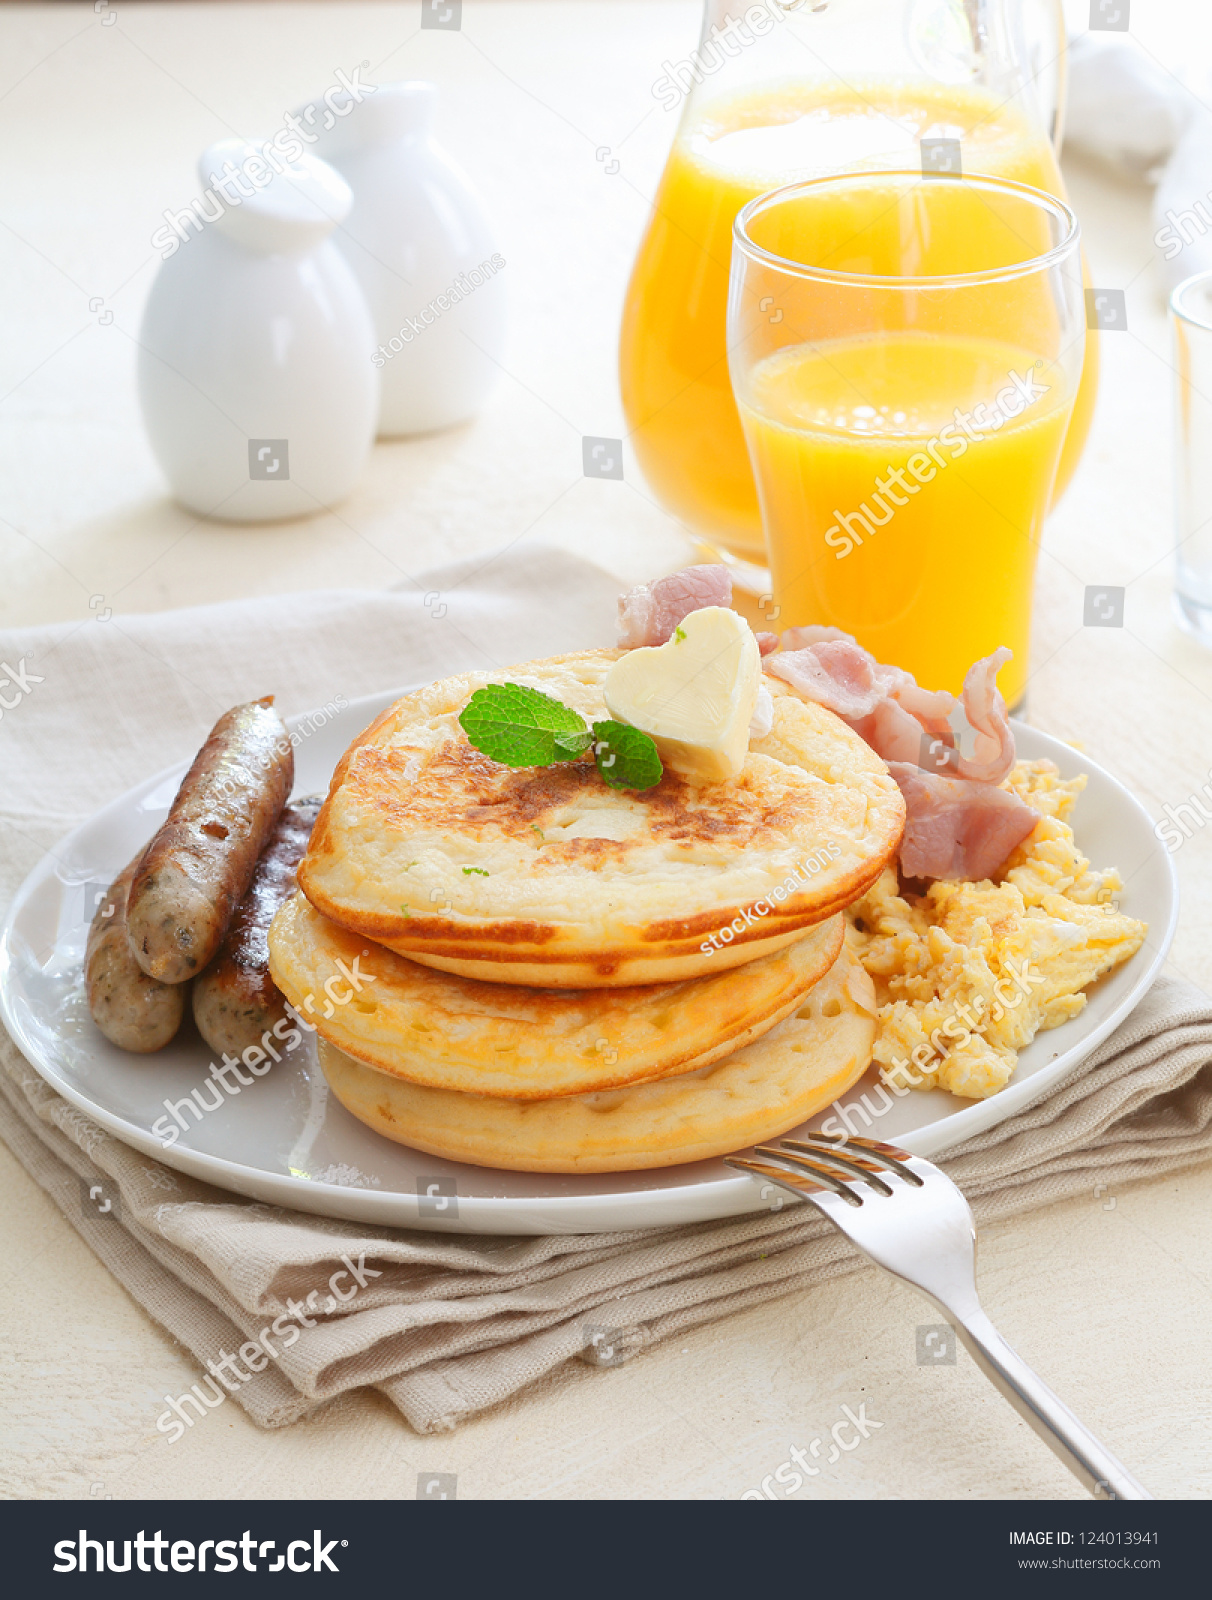 Healthy Nutritious Breakfast With Sausages, Eggs , Bacon And A Stack Of ...